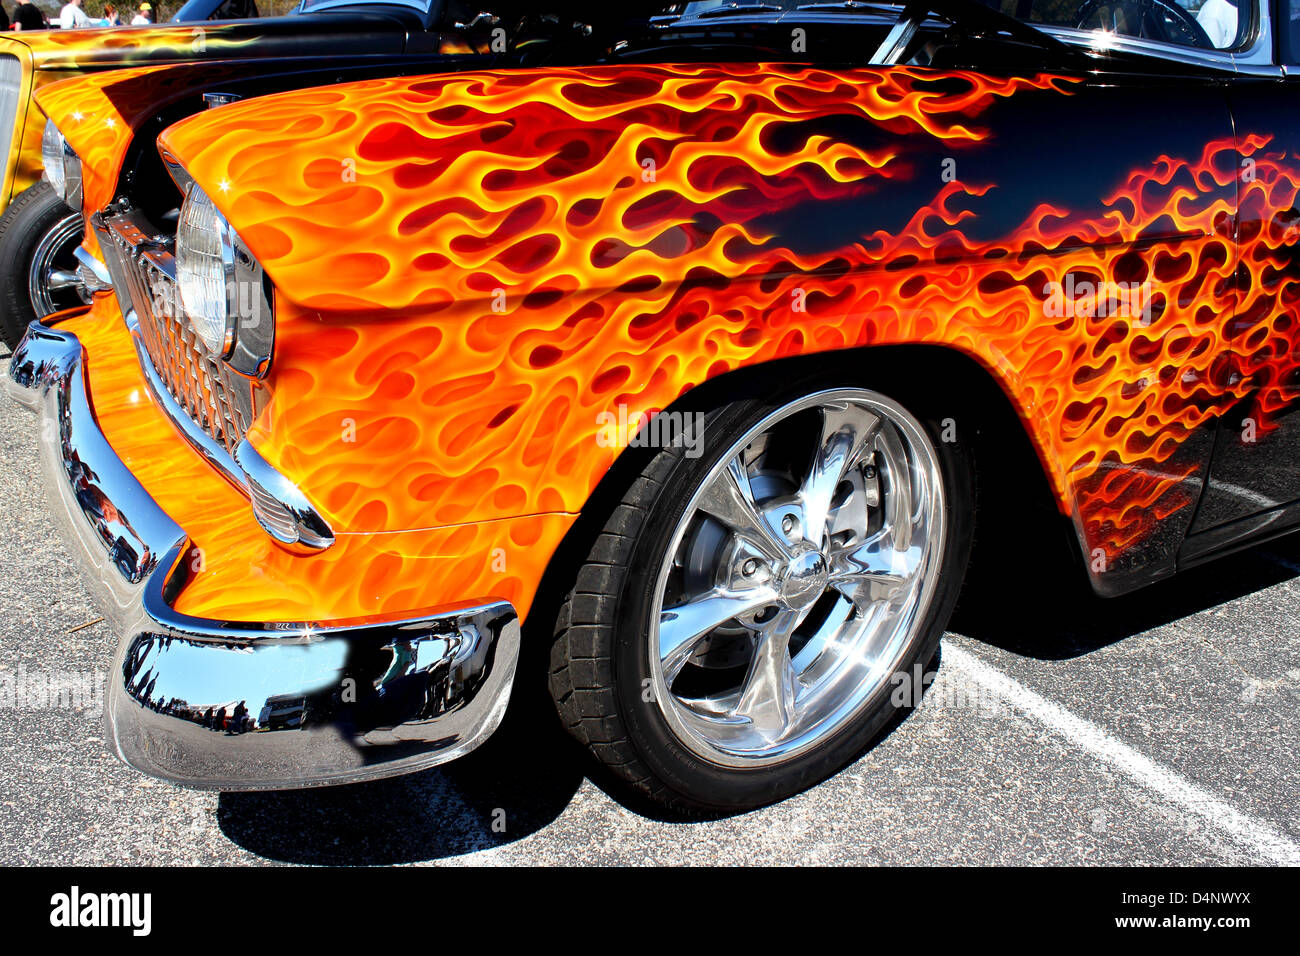 Vintage American muscle car with flame paint job at the Run to the Sun car show in Myrtle Beach, SC on March 15, 2013 Stock Photo